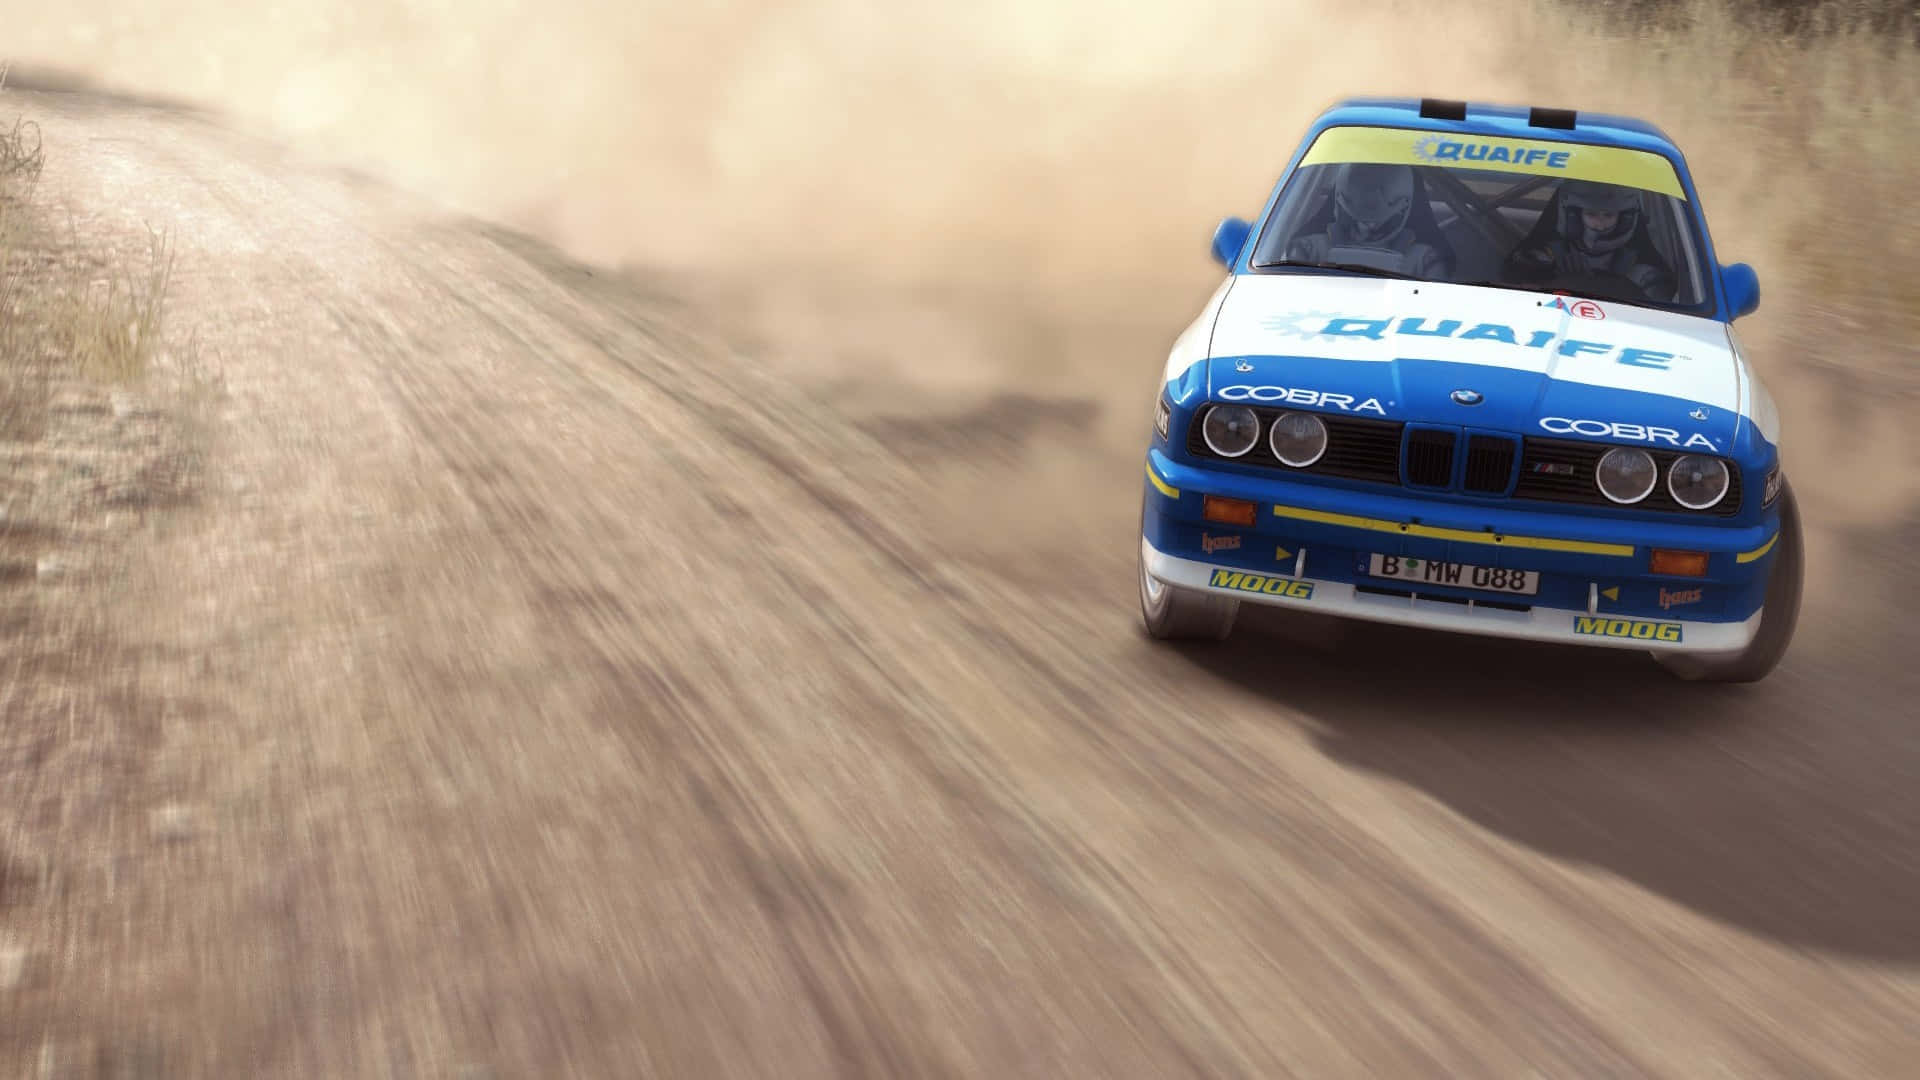 Get your Motor Running with this Stunning Dirt Rally Scene